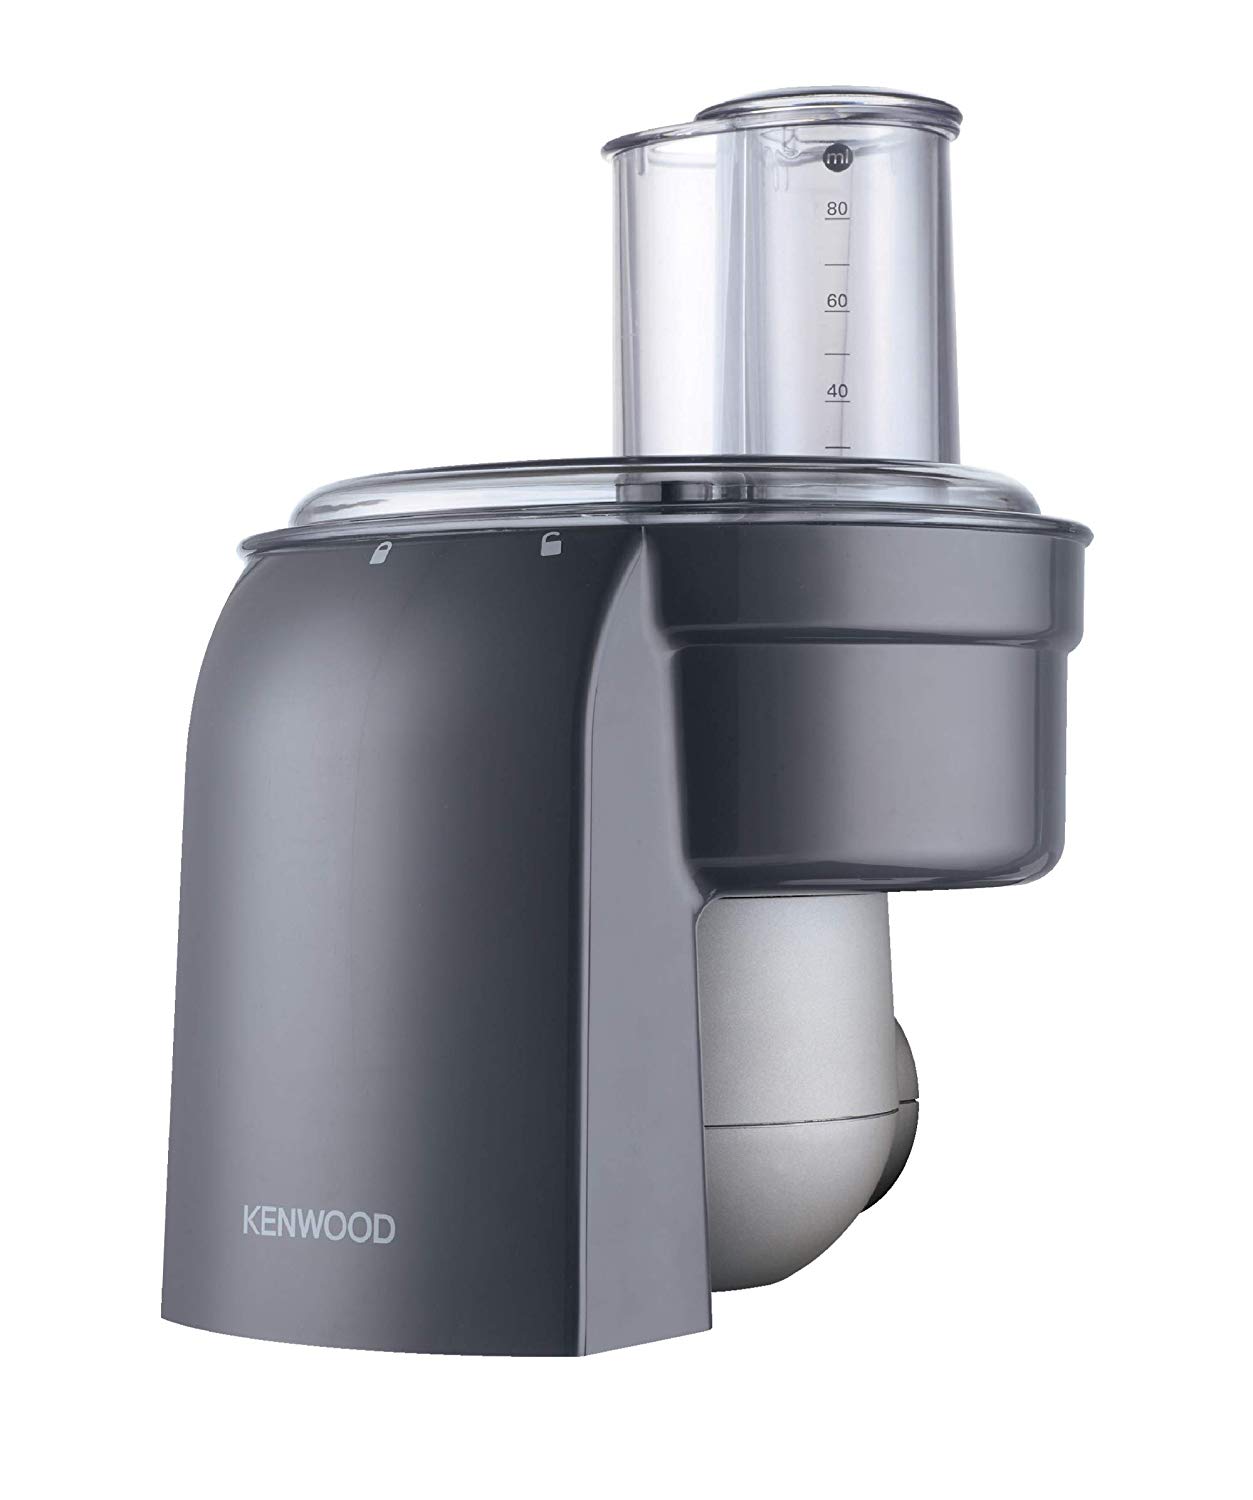  Kenwood MAX980ME Pasta Food Processor Accessories, Silver :  Home & Kitchen